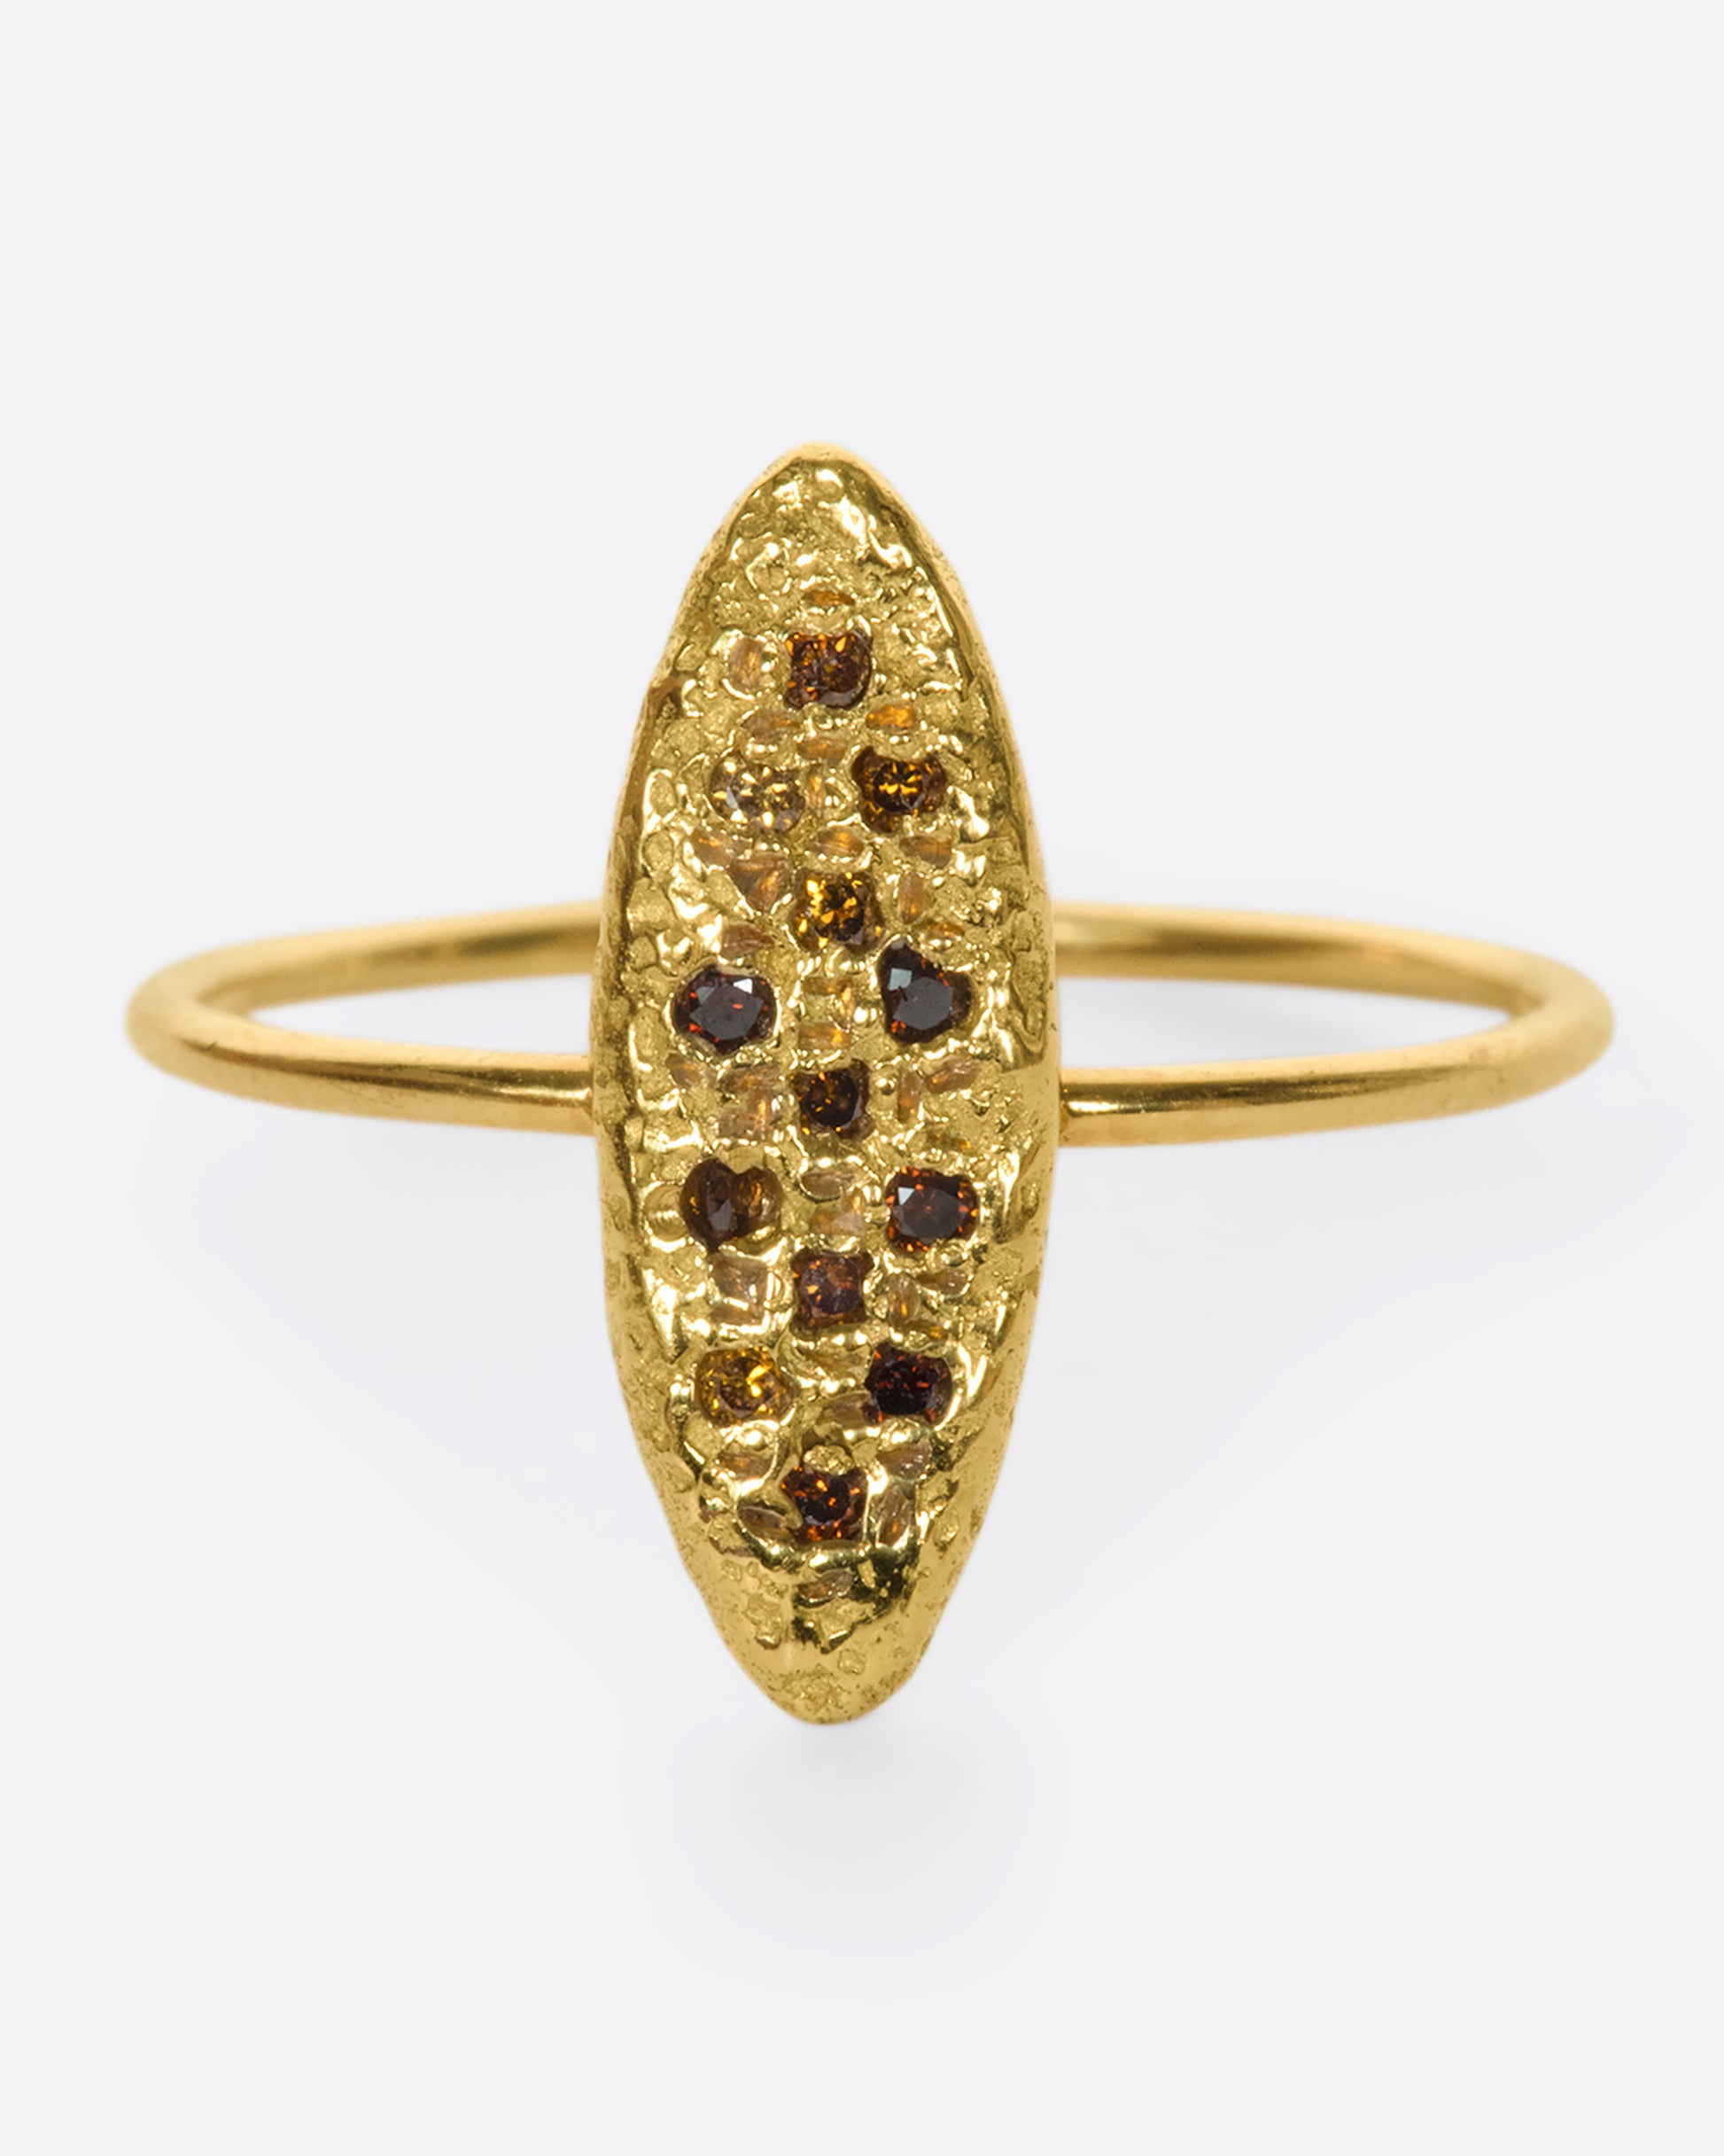 This 18k gold textured oval ring is dotted with vibrant, colorful diamonds